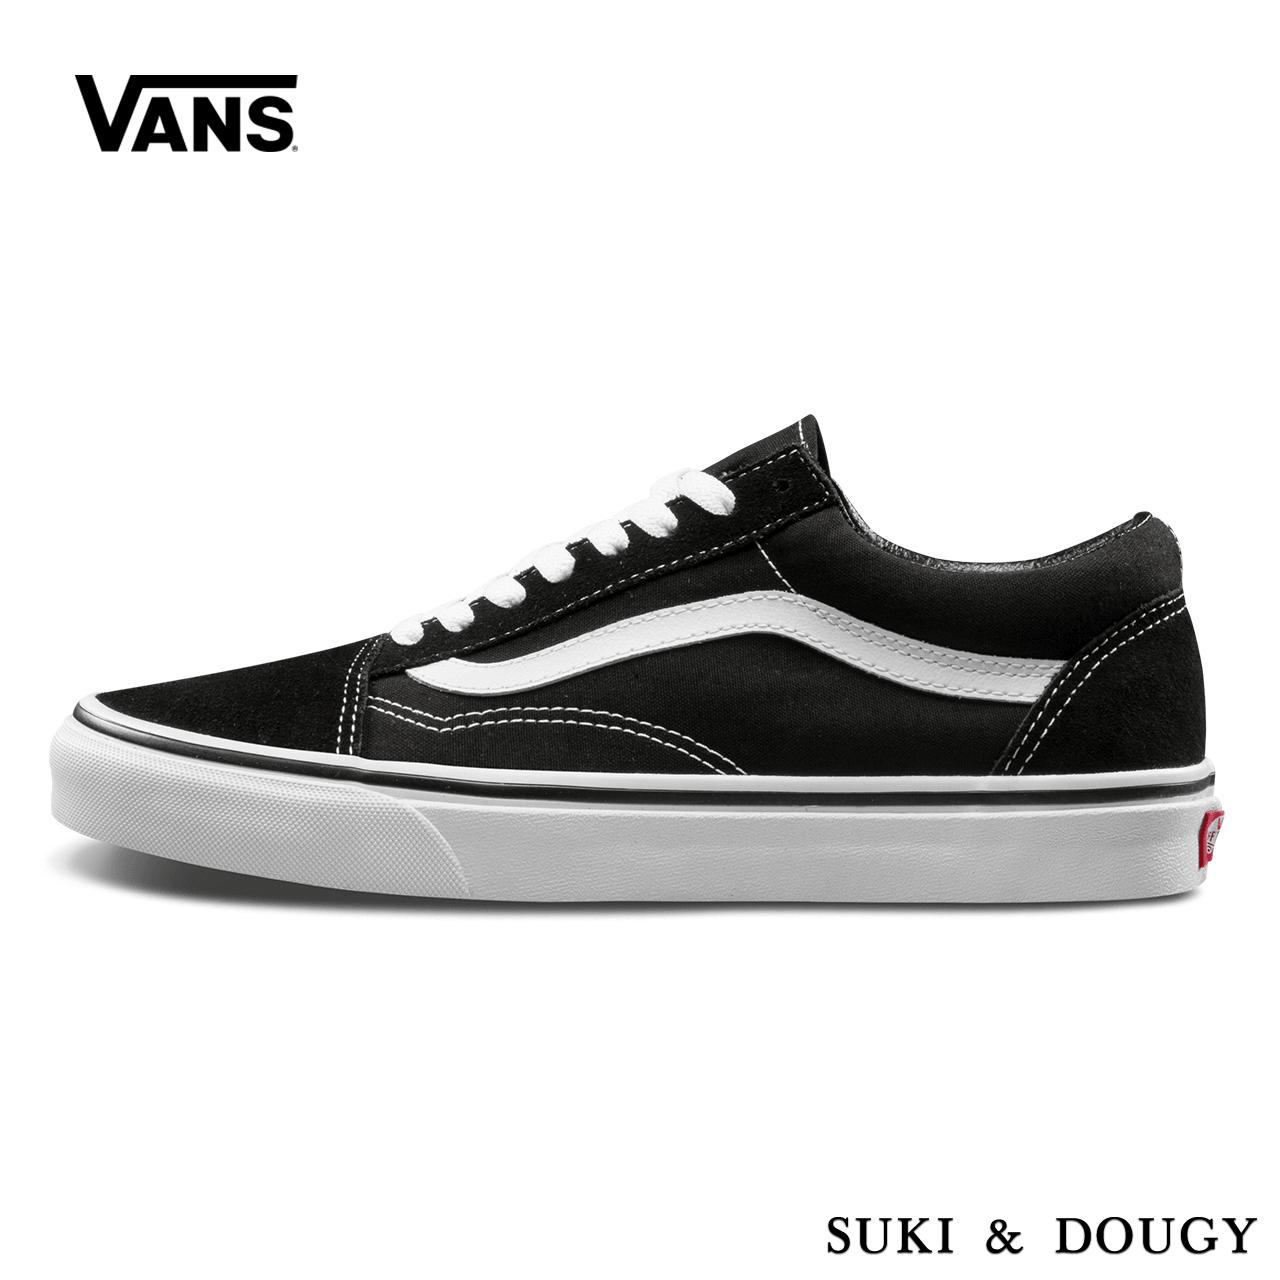 where to buy vans from